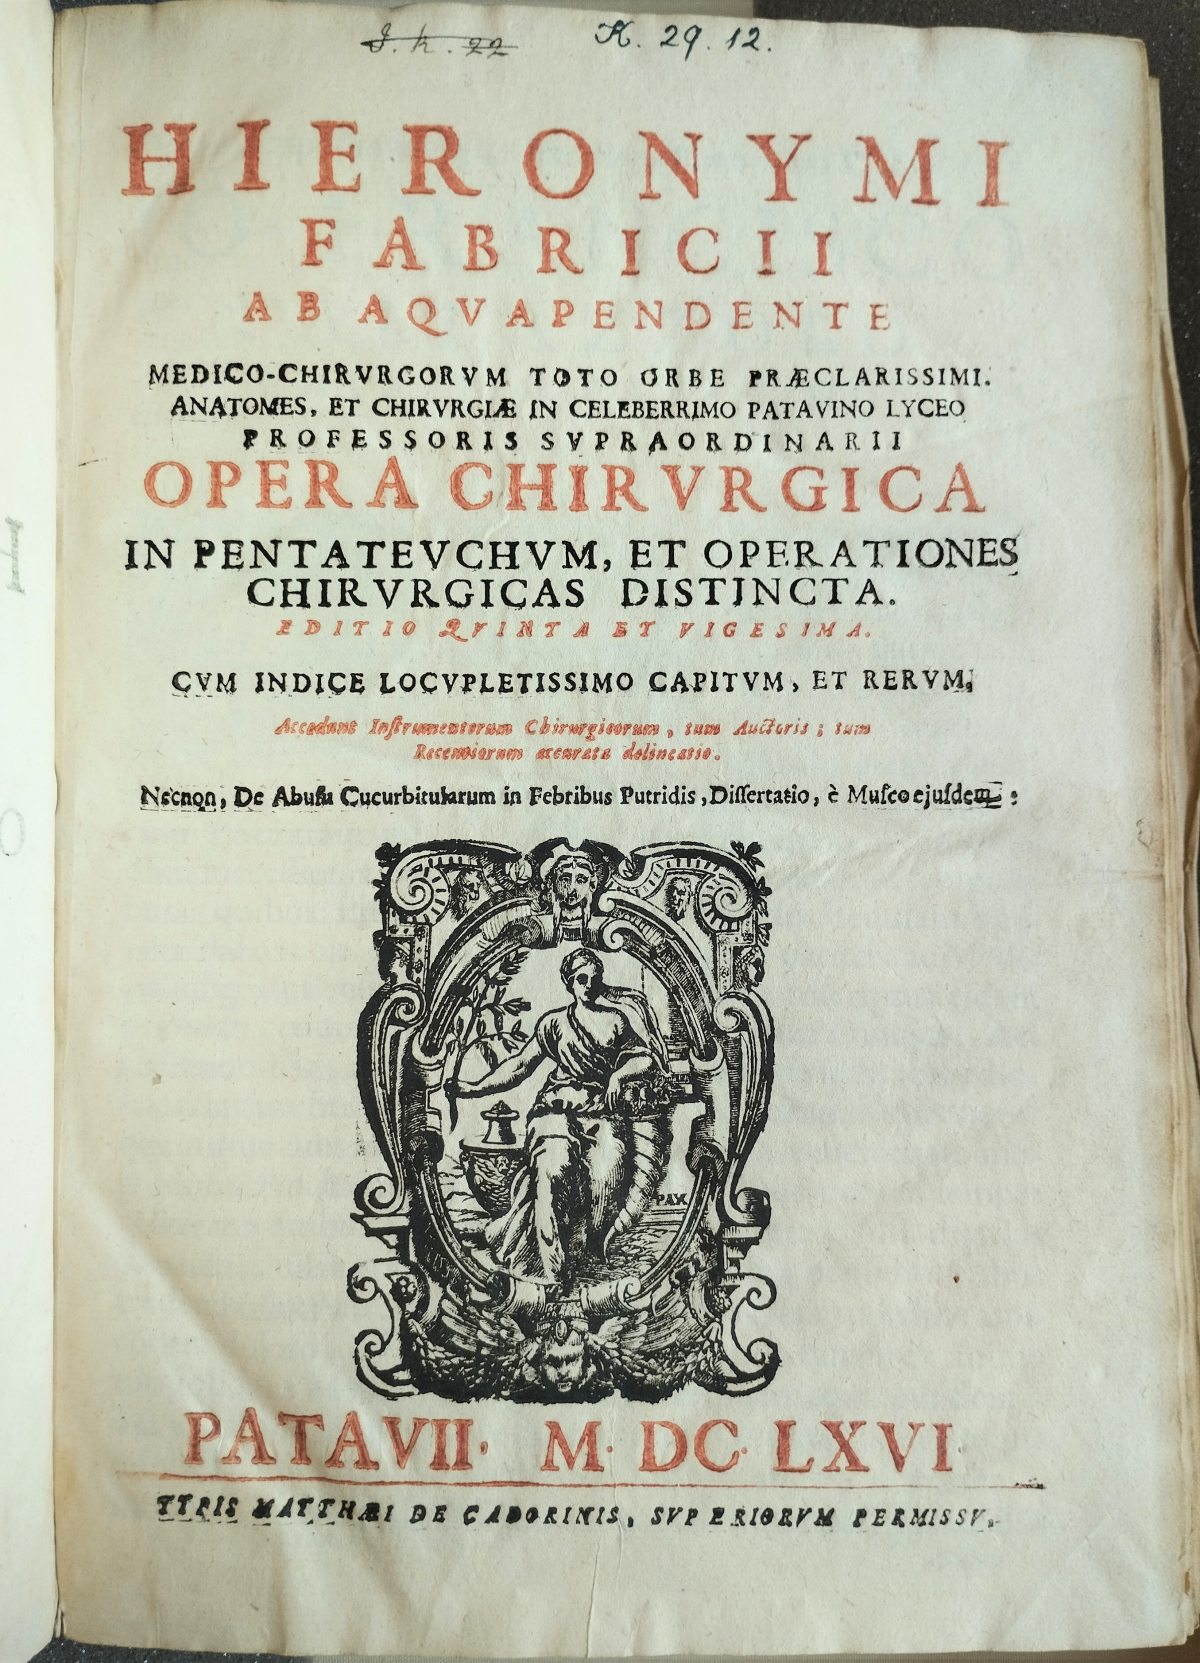 Title page of the book "Opera chirurgica in pentateuchum" by Hieronymus Fabricius ab Aquadependente (1666). Text in red and black, with an engraved printer's device showing an illustration of Pax (the roman goddess of peace) holding a branch.